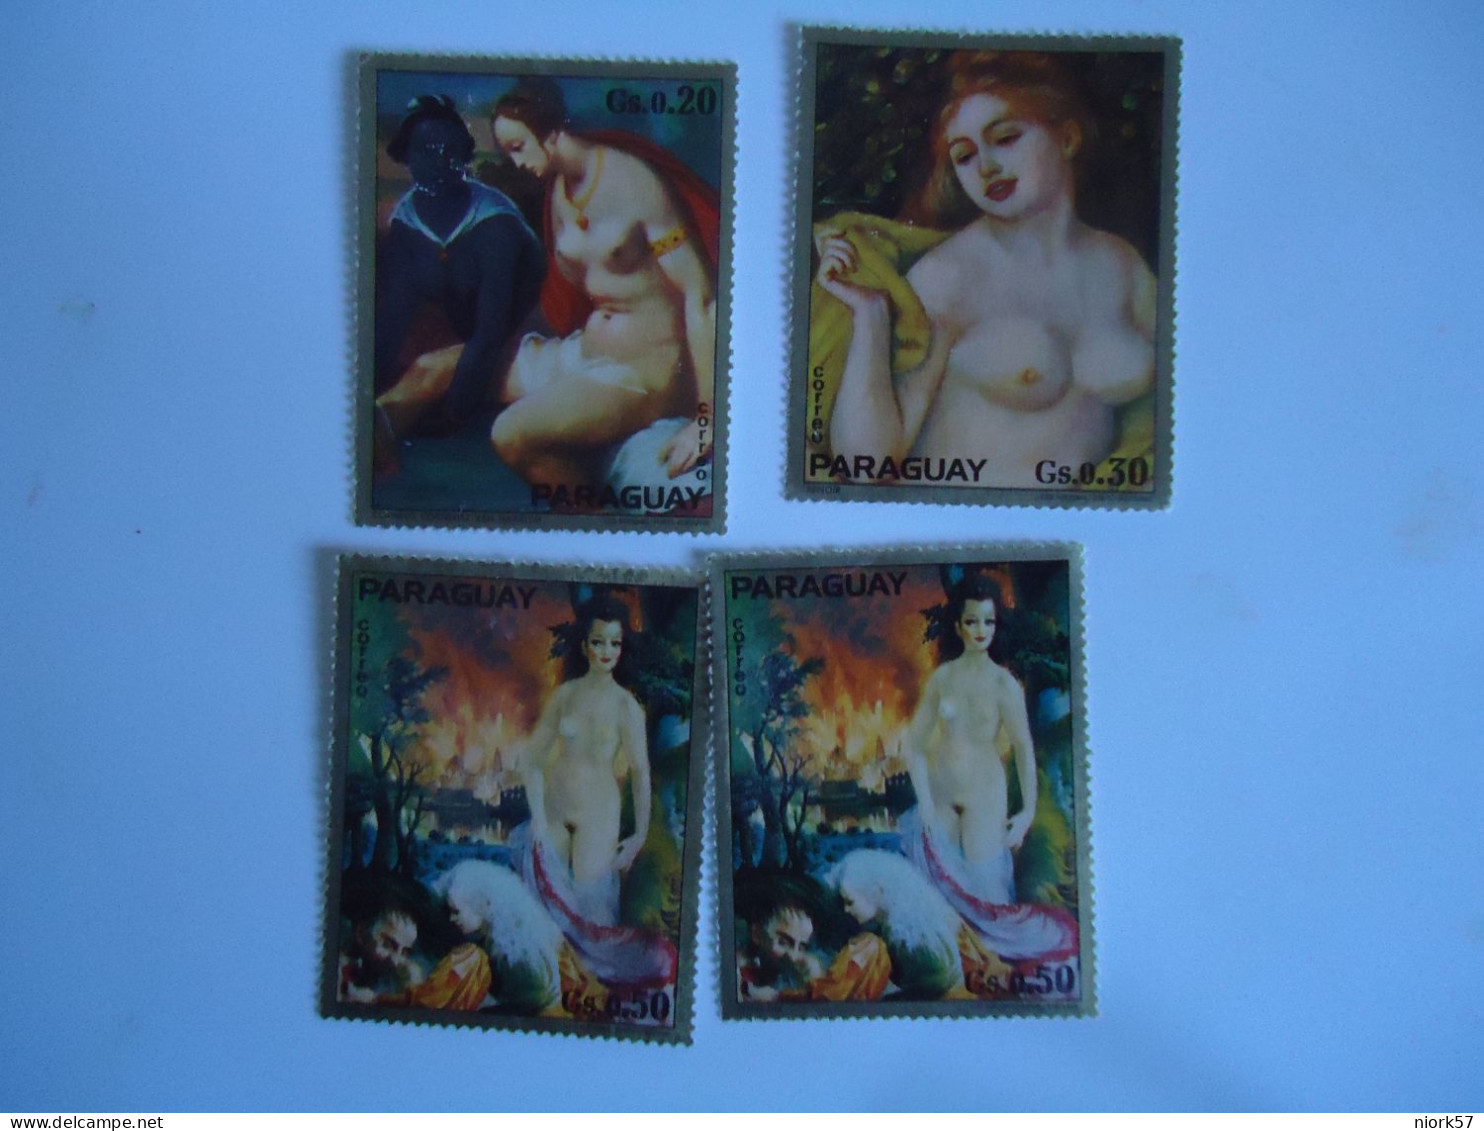 PARAGUAY  MNH 3 MLN 1 4 STAMPS  PAINTINGS NUDES - Nus